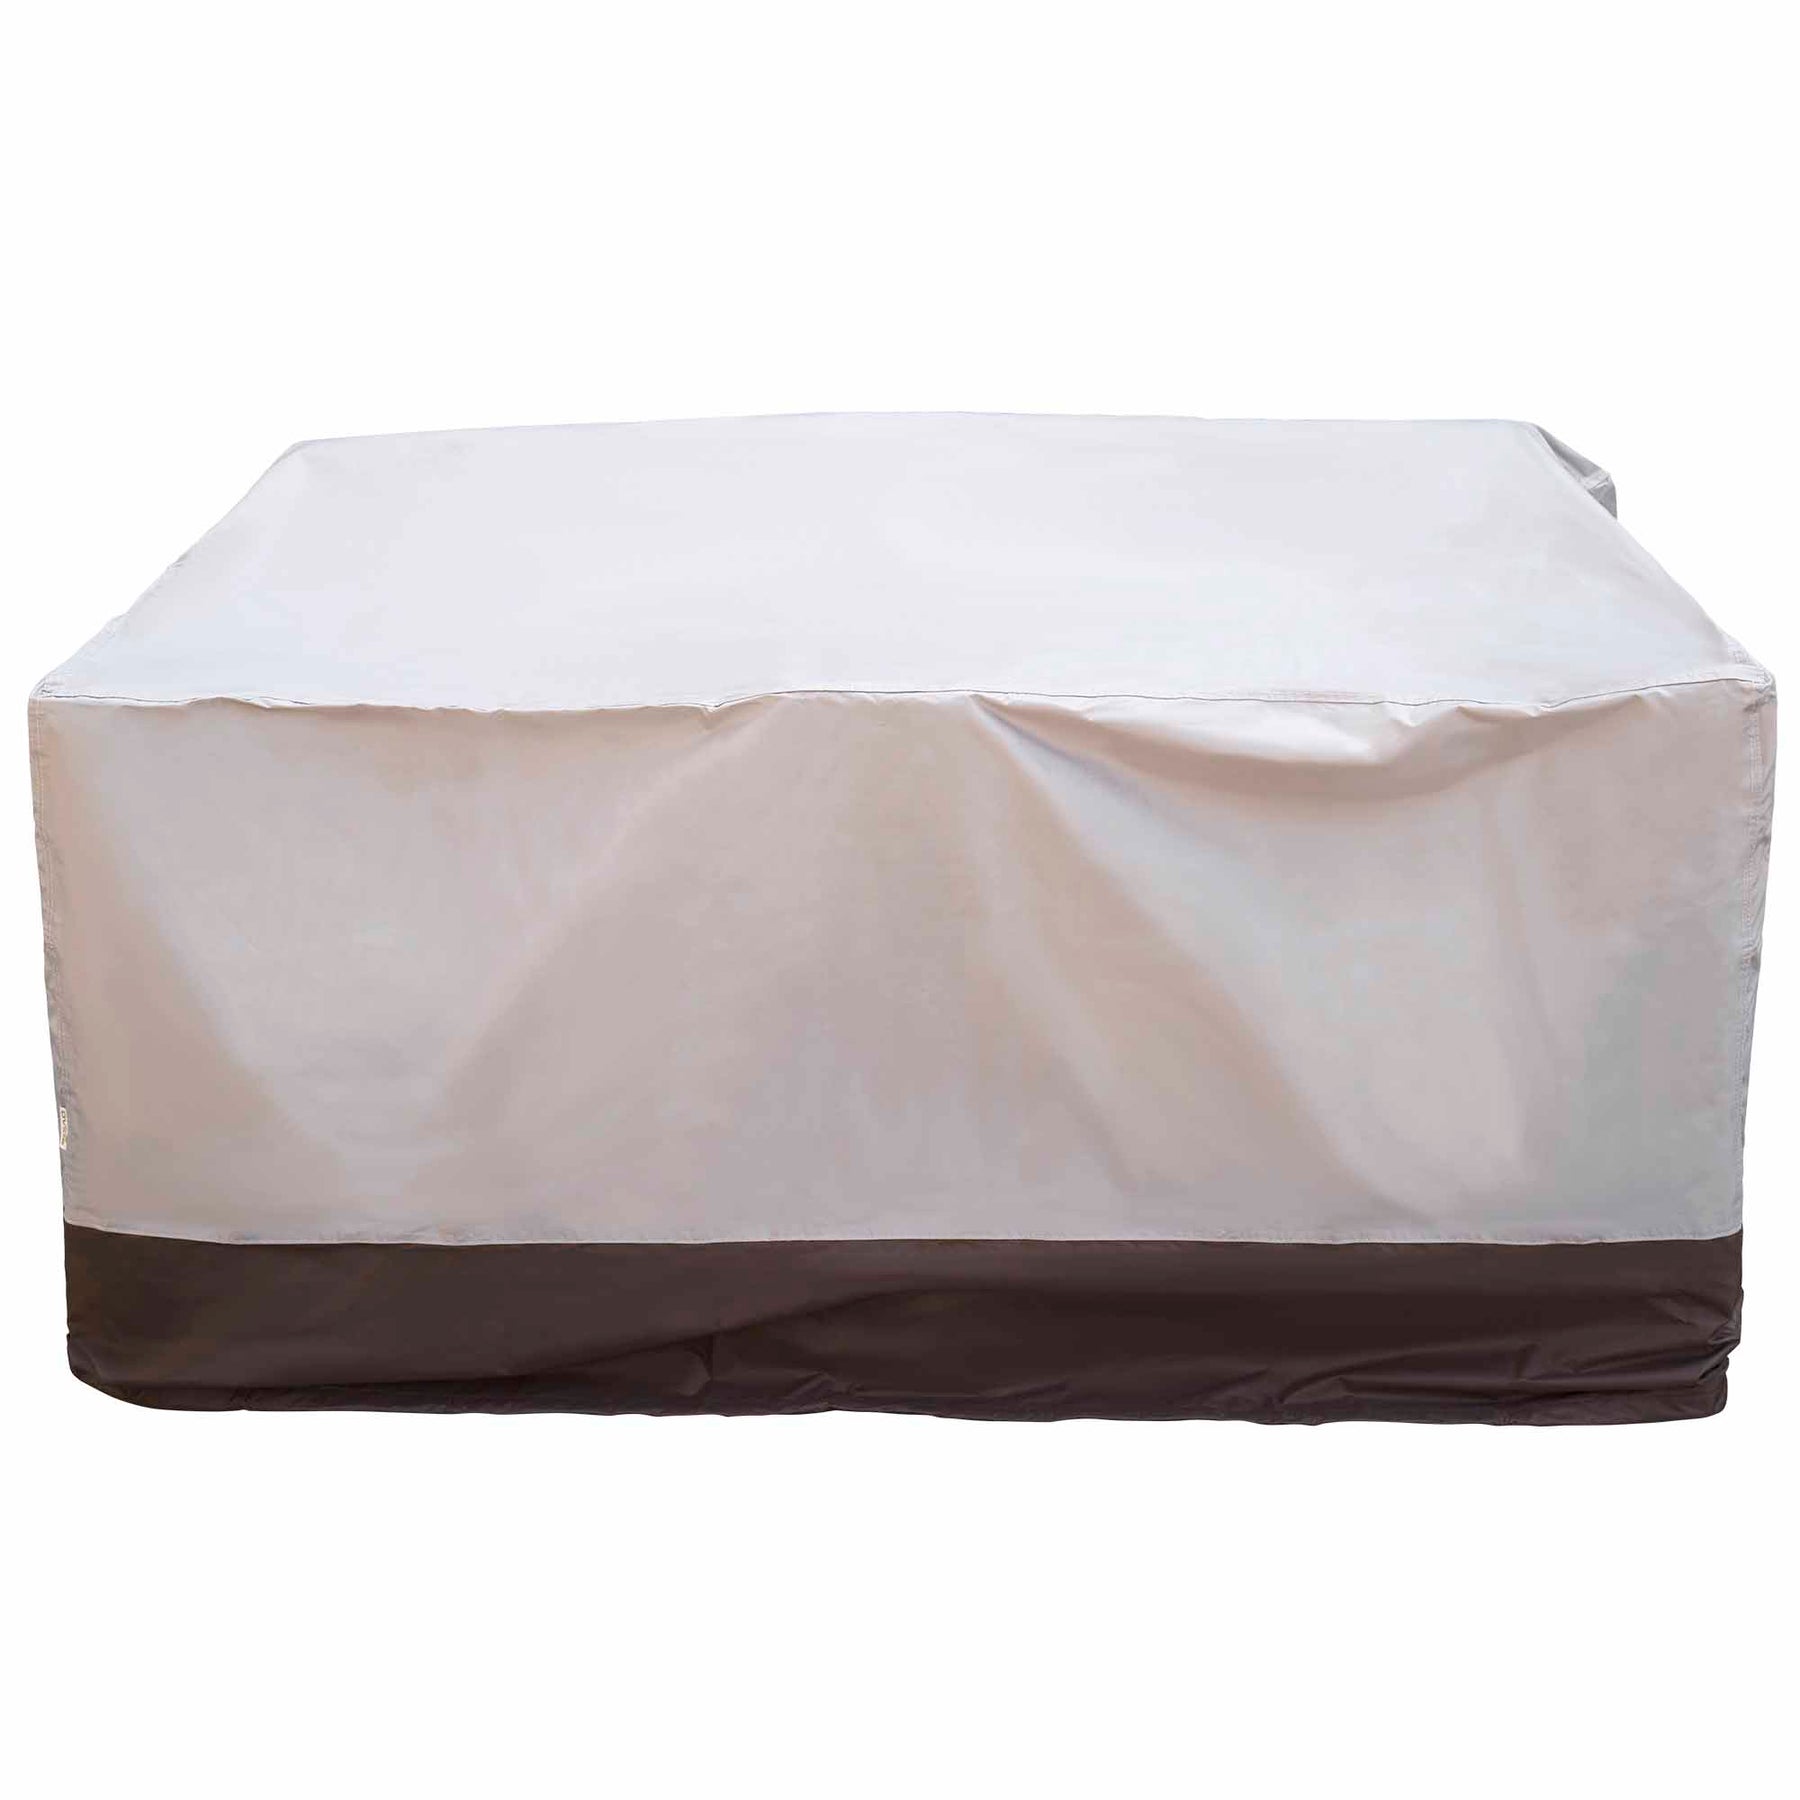 Ovios Outdoor Sofa Cover Waterproof for Vultros Series (Refer to the Dimension in Description)